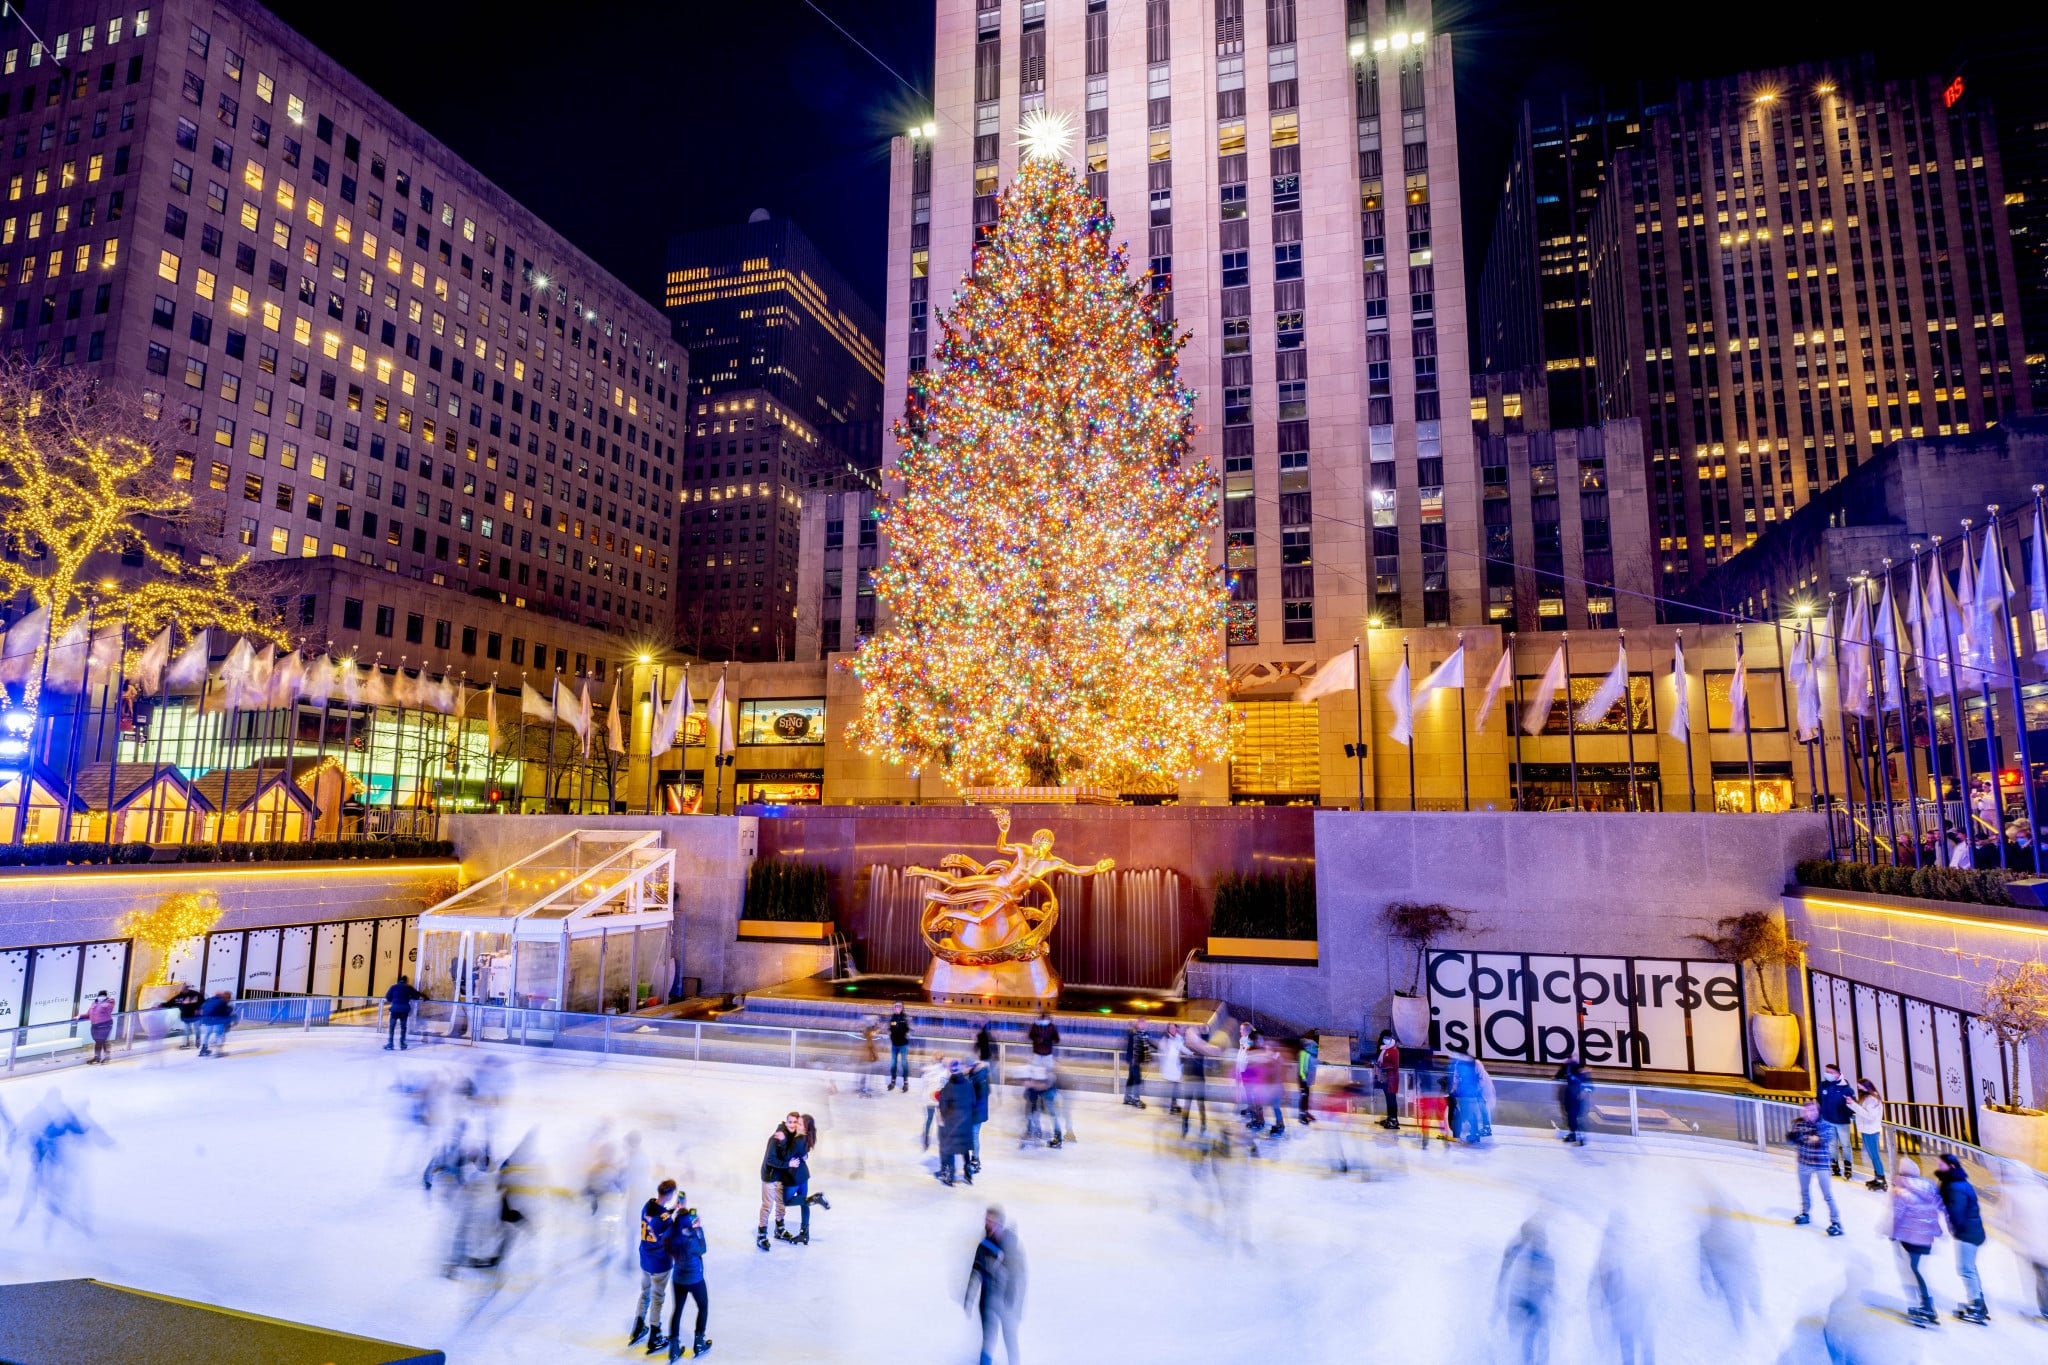 Kelly Clarkson will host the Christmas in Rockfeller Center special in 2023. Here, the tree is pictured in 2021. Carly Pearce performs during the 2023 special